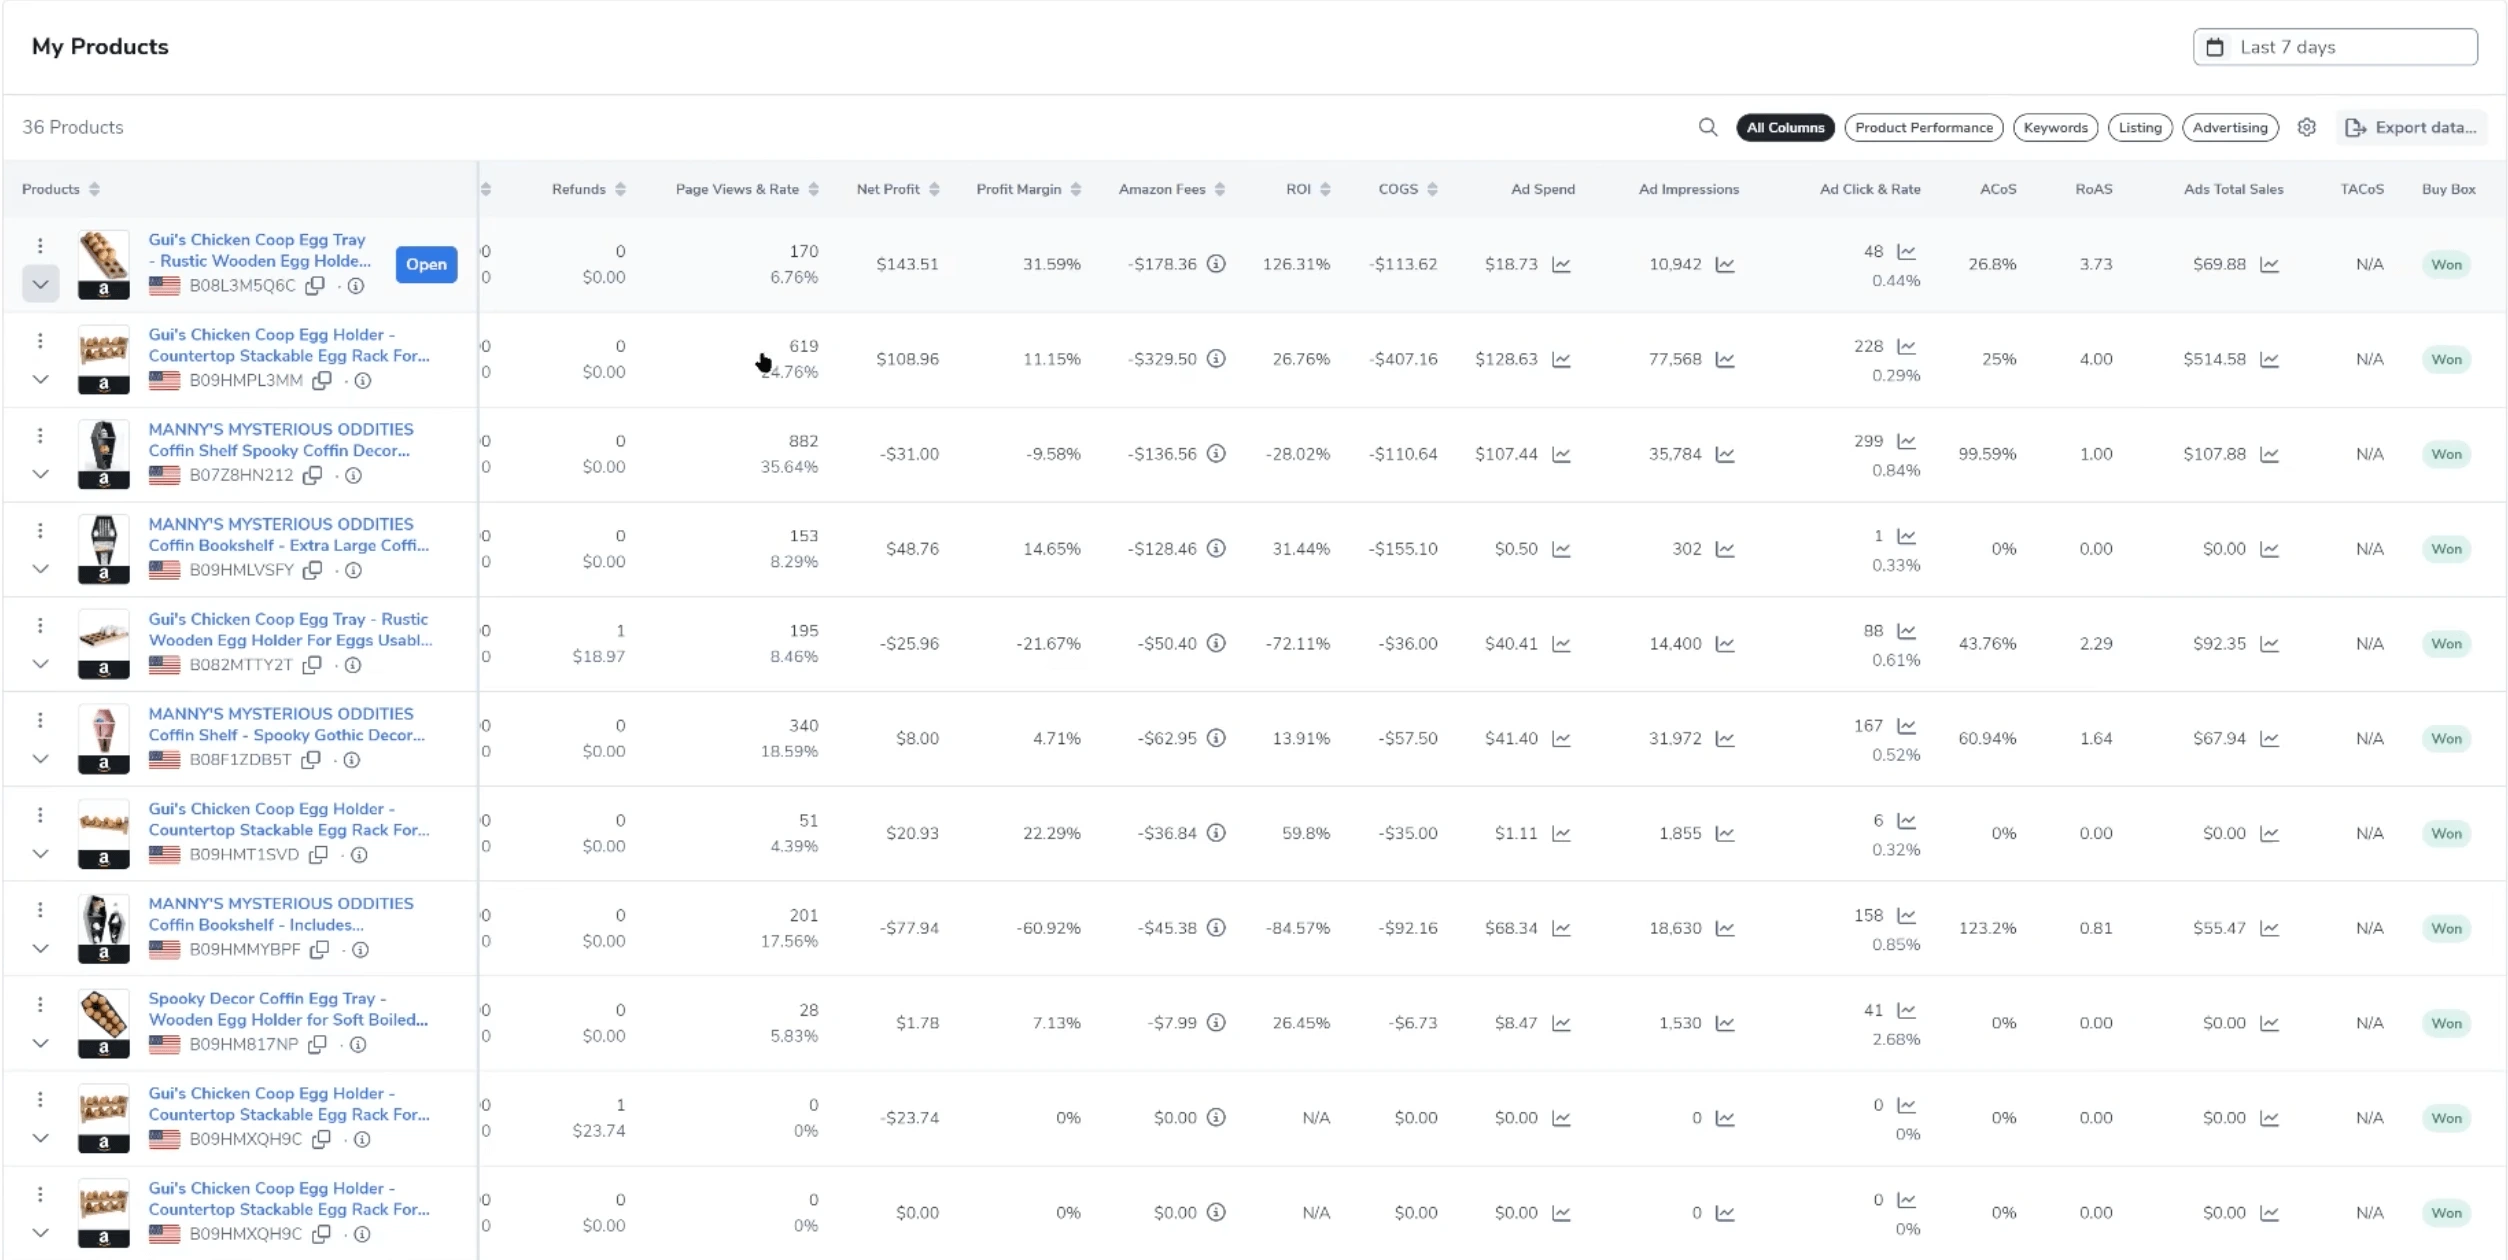 View of "My Products" in Insights Dashboard